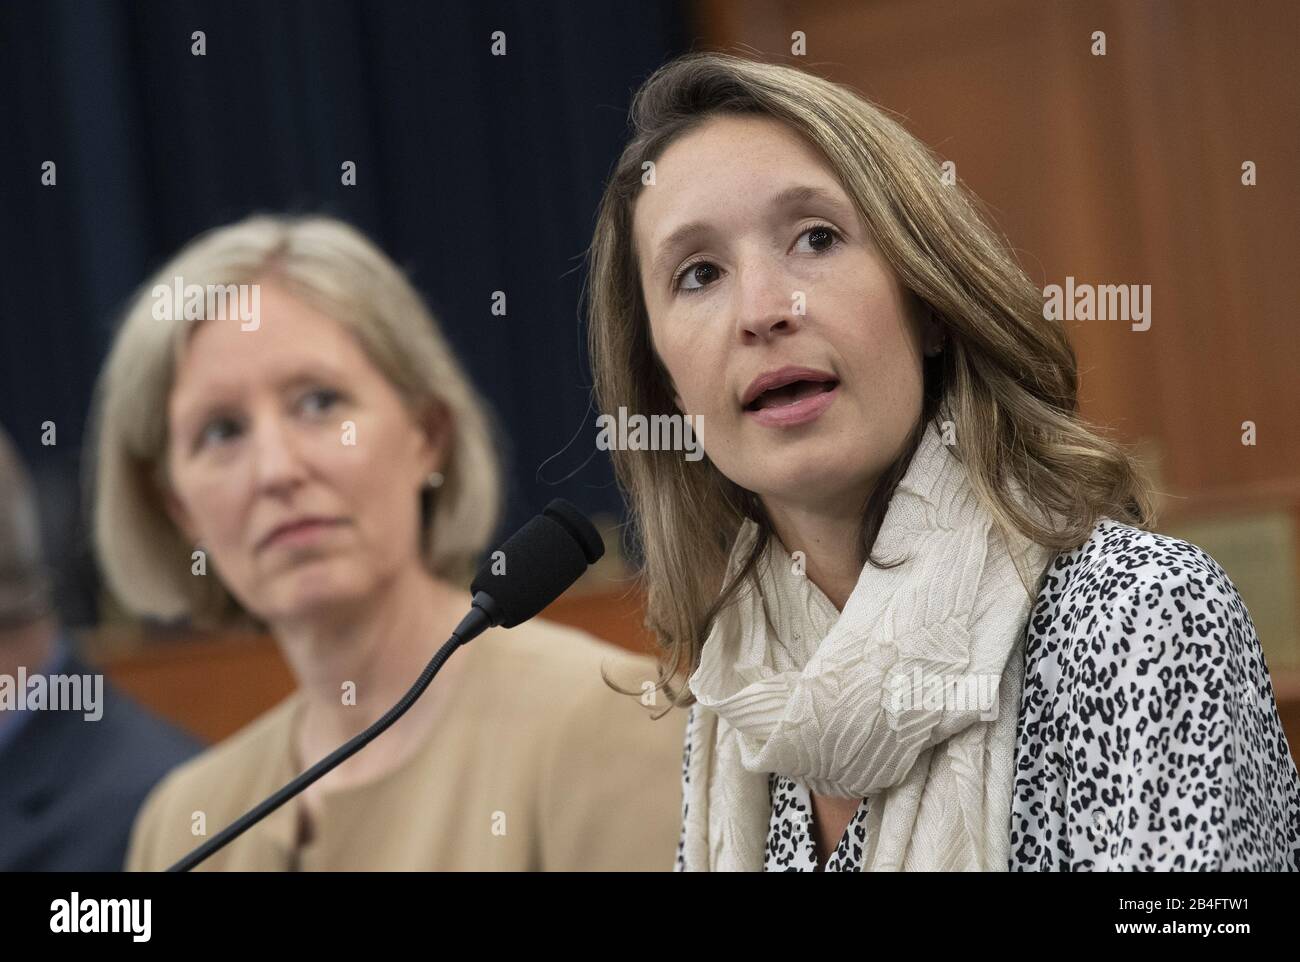 Washington, United States. 06th Mar, 2020. Lauren Gardner (R), co-director of the Center for.Systems Science and Engineering at Johns Hopkins University, speaks alongside epidemiologist Lisa Maragakis, Senior Director of Infection Prevention for the John's Hopkins Health System, as she delivers remarks on the Coronavirus Tracking Map that her team developed and is being implemented worldwide to track the spread of the virus, during a briefing on the virus and the best ways to mobilize resources and improve care and response, on Capitol Hill. Credit: UPI/Alamy Live News Stock Photo